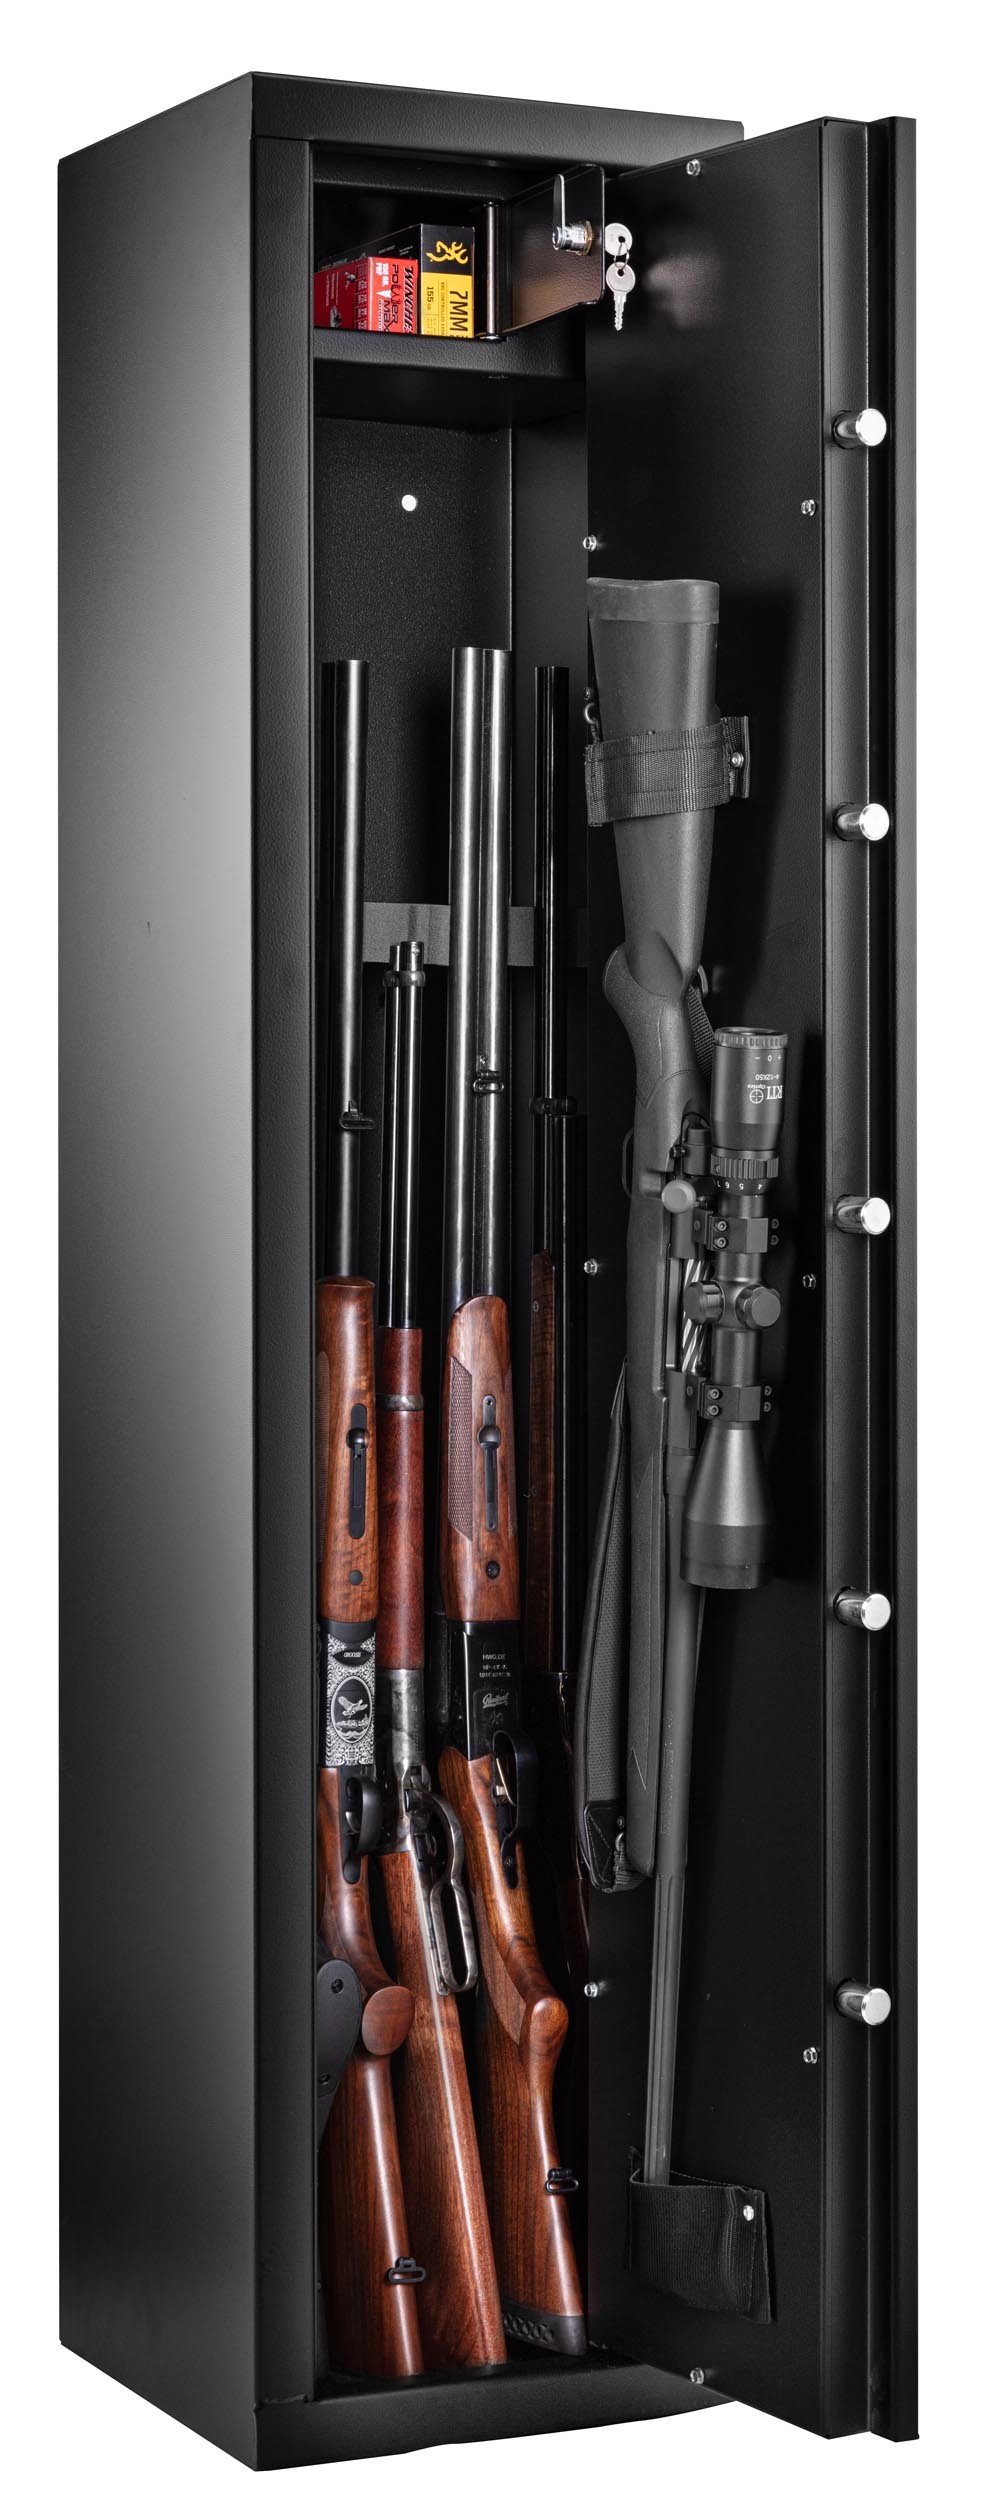 Armoire forte Rietti 7 armes + coffre intérieur, MADE IN CHASSE - Equipements de chasse